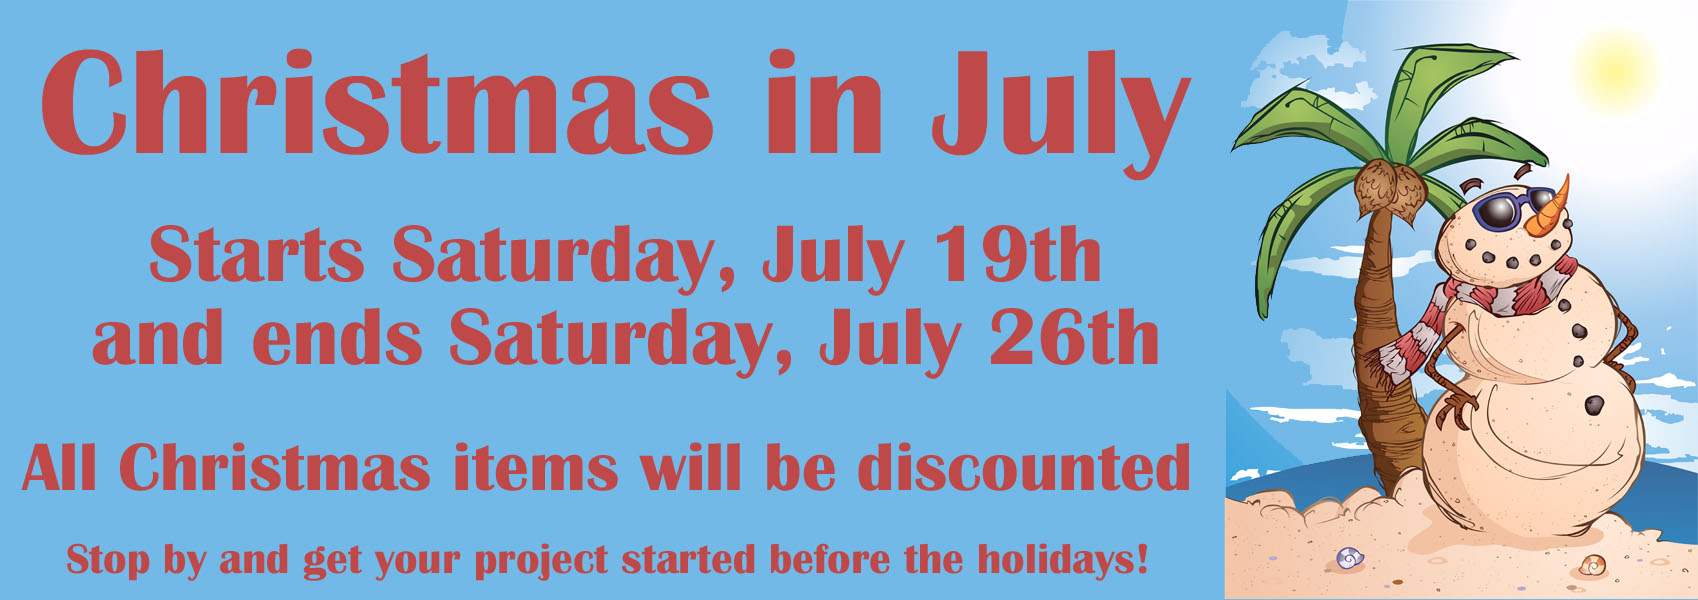 2014 Christmas in July!